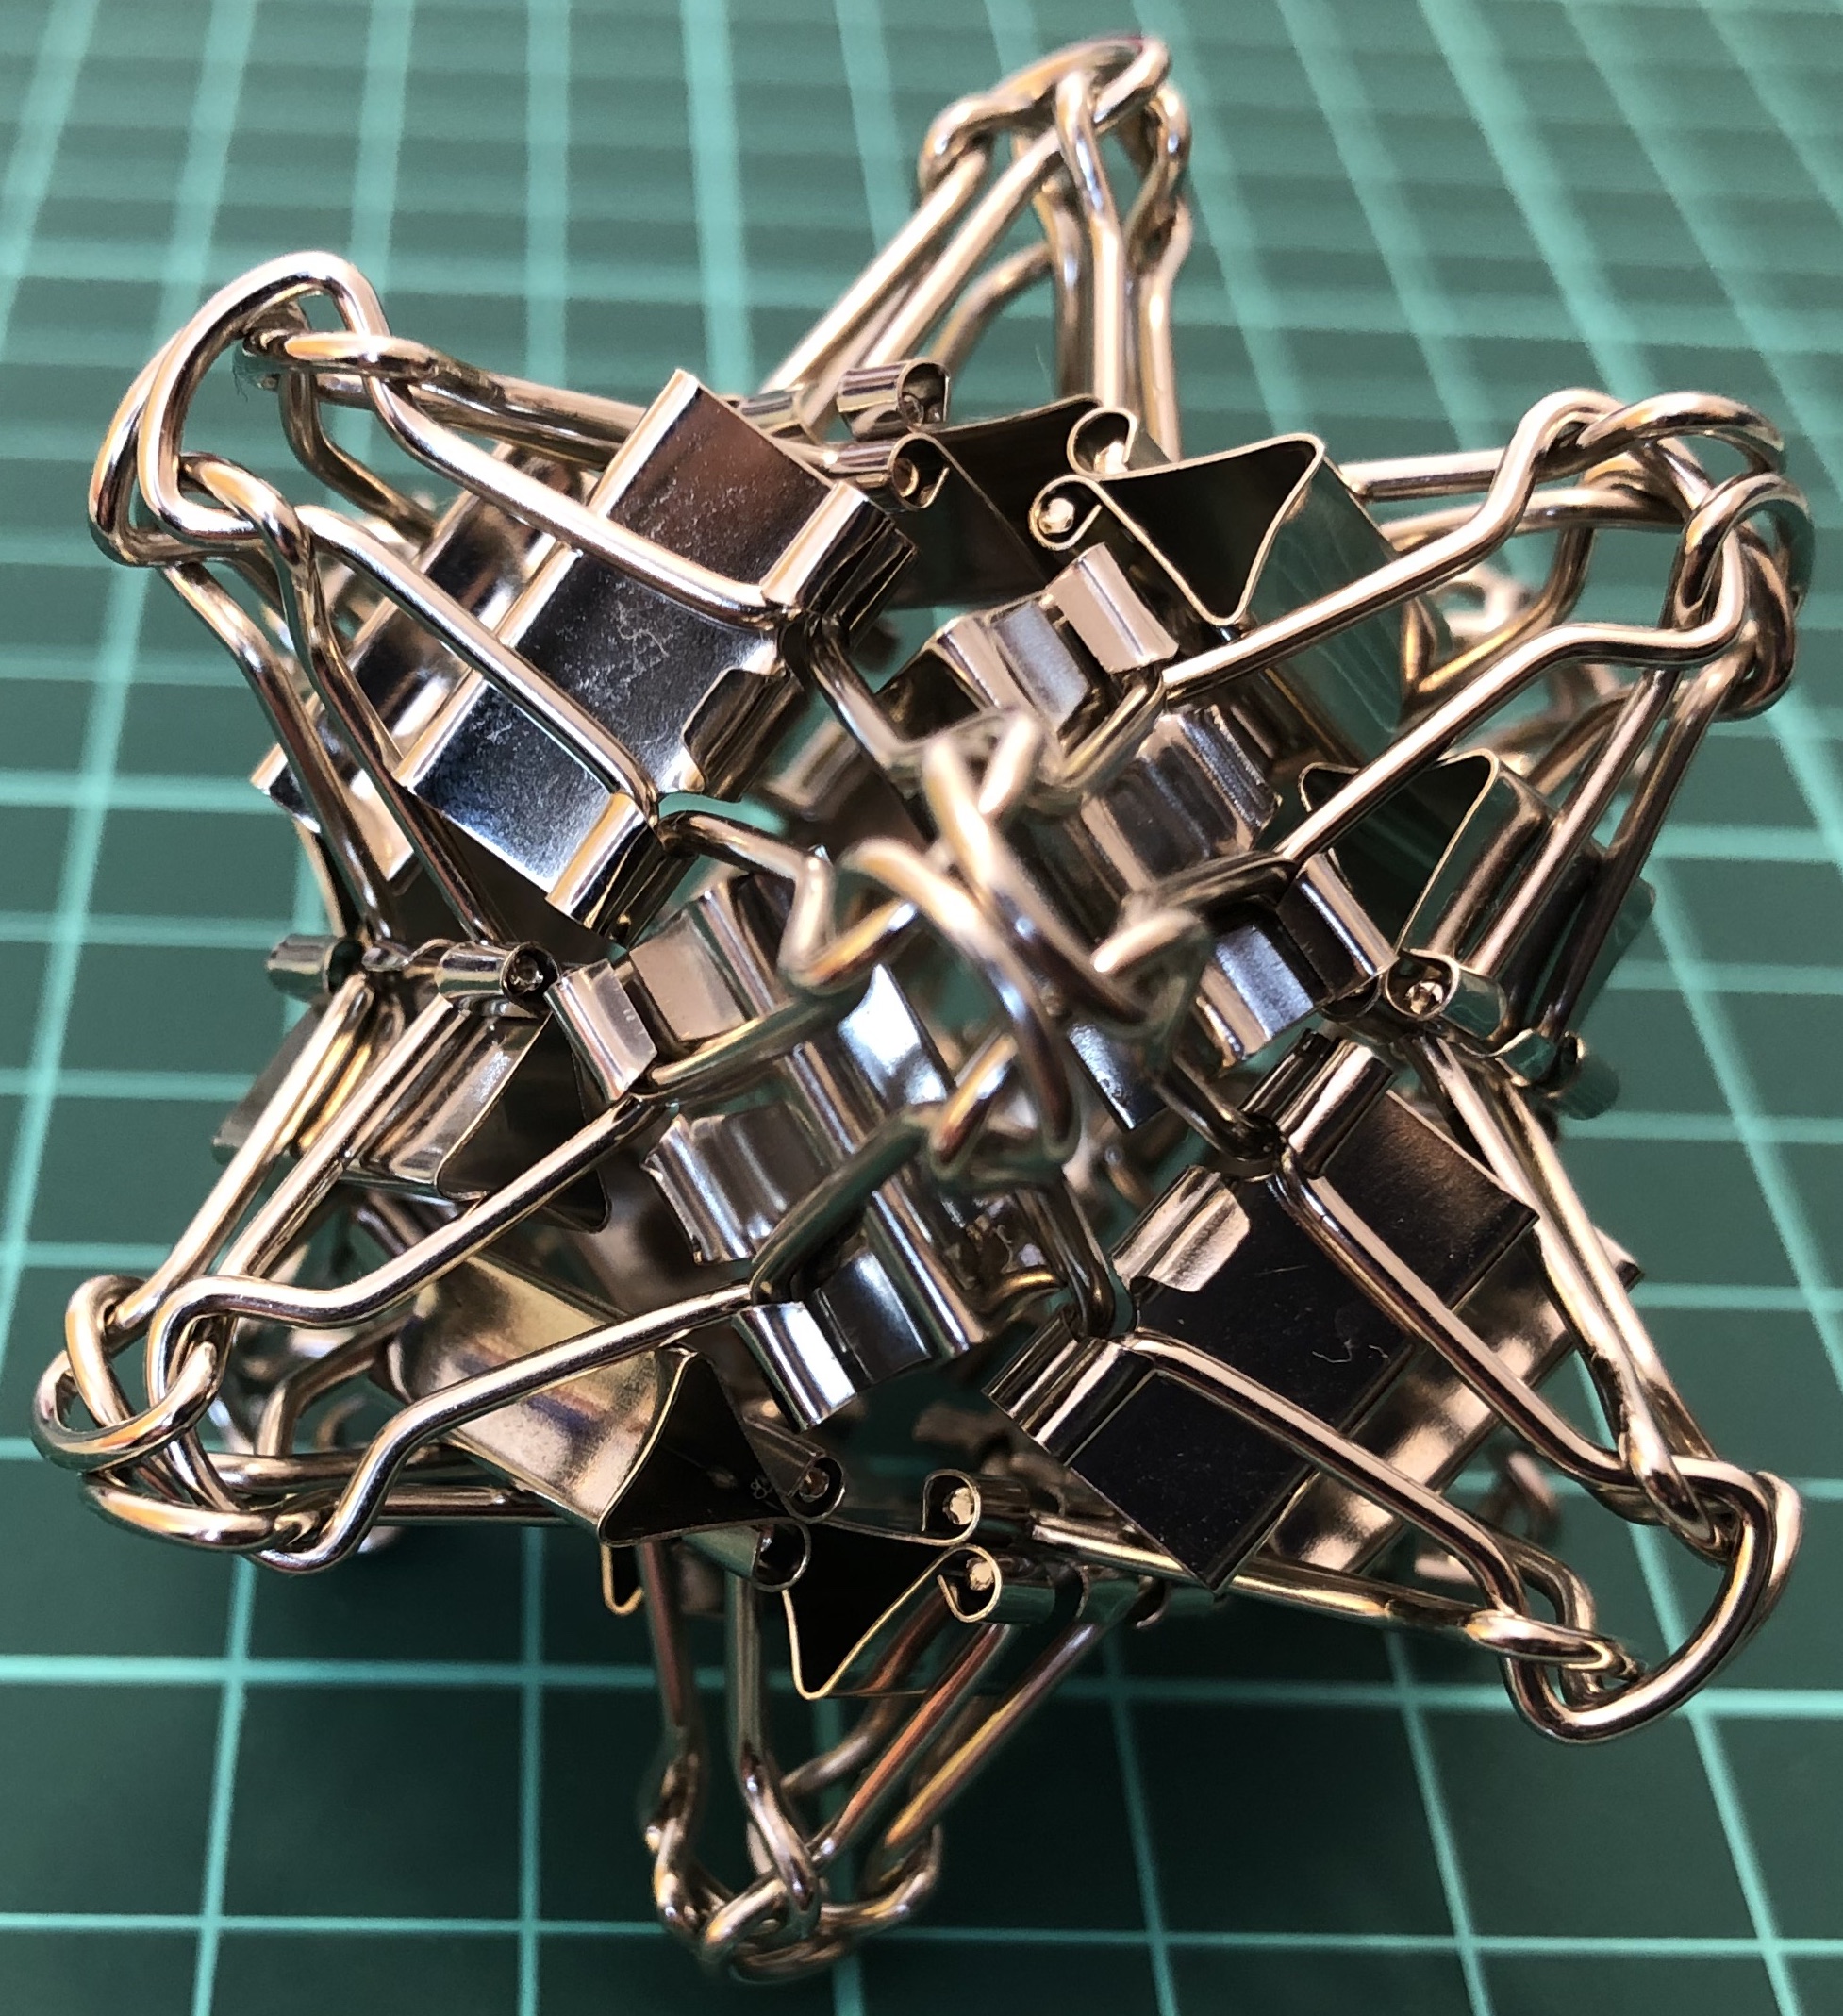 24 clips forming spiky cuboctahedron